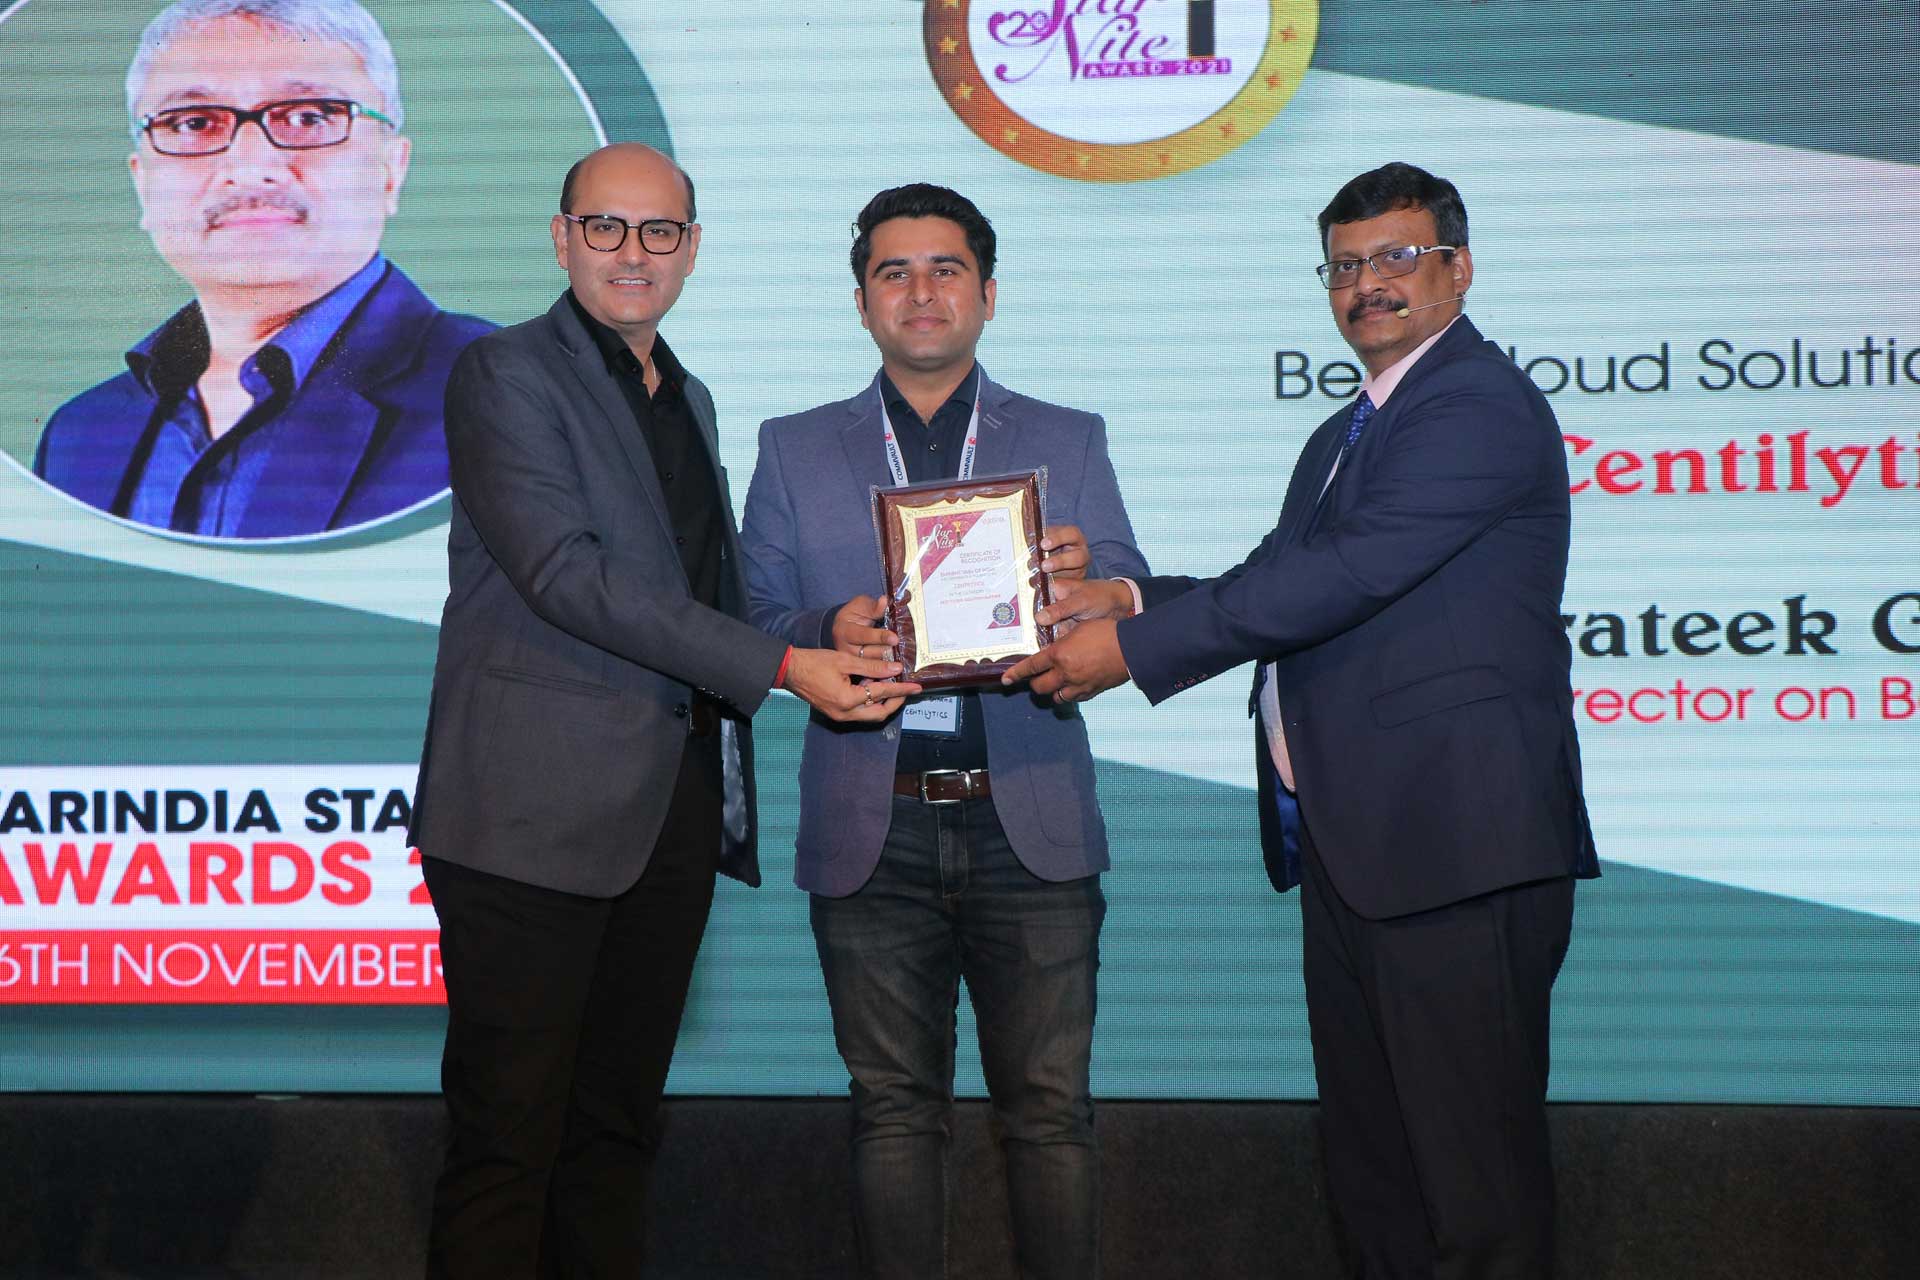 Best Cloud Solution Partner Award goes to Centilytics at 20th Star Nite Awards 2021